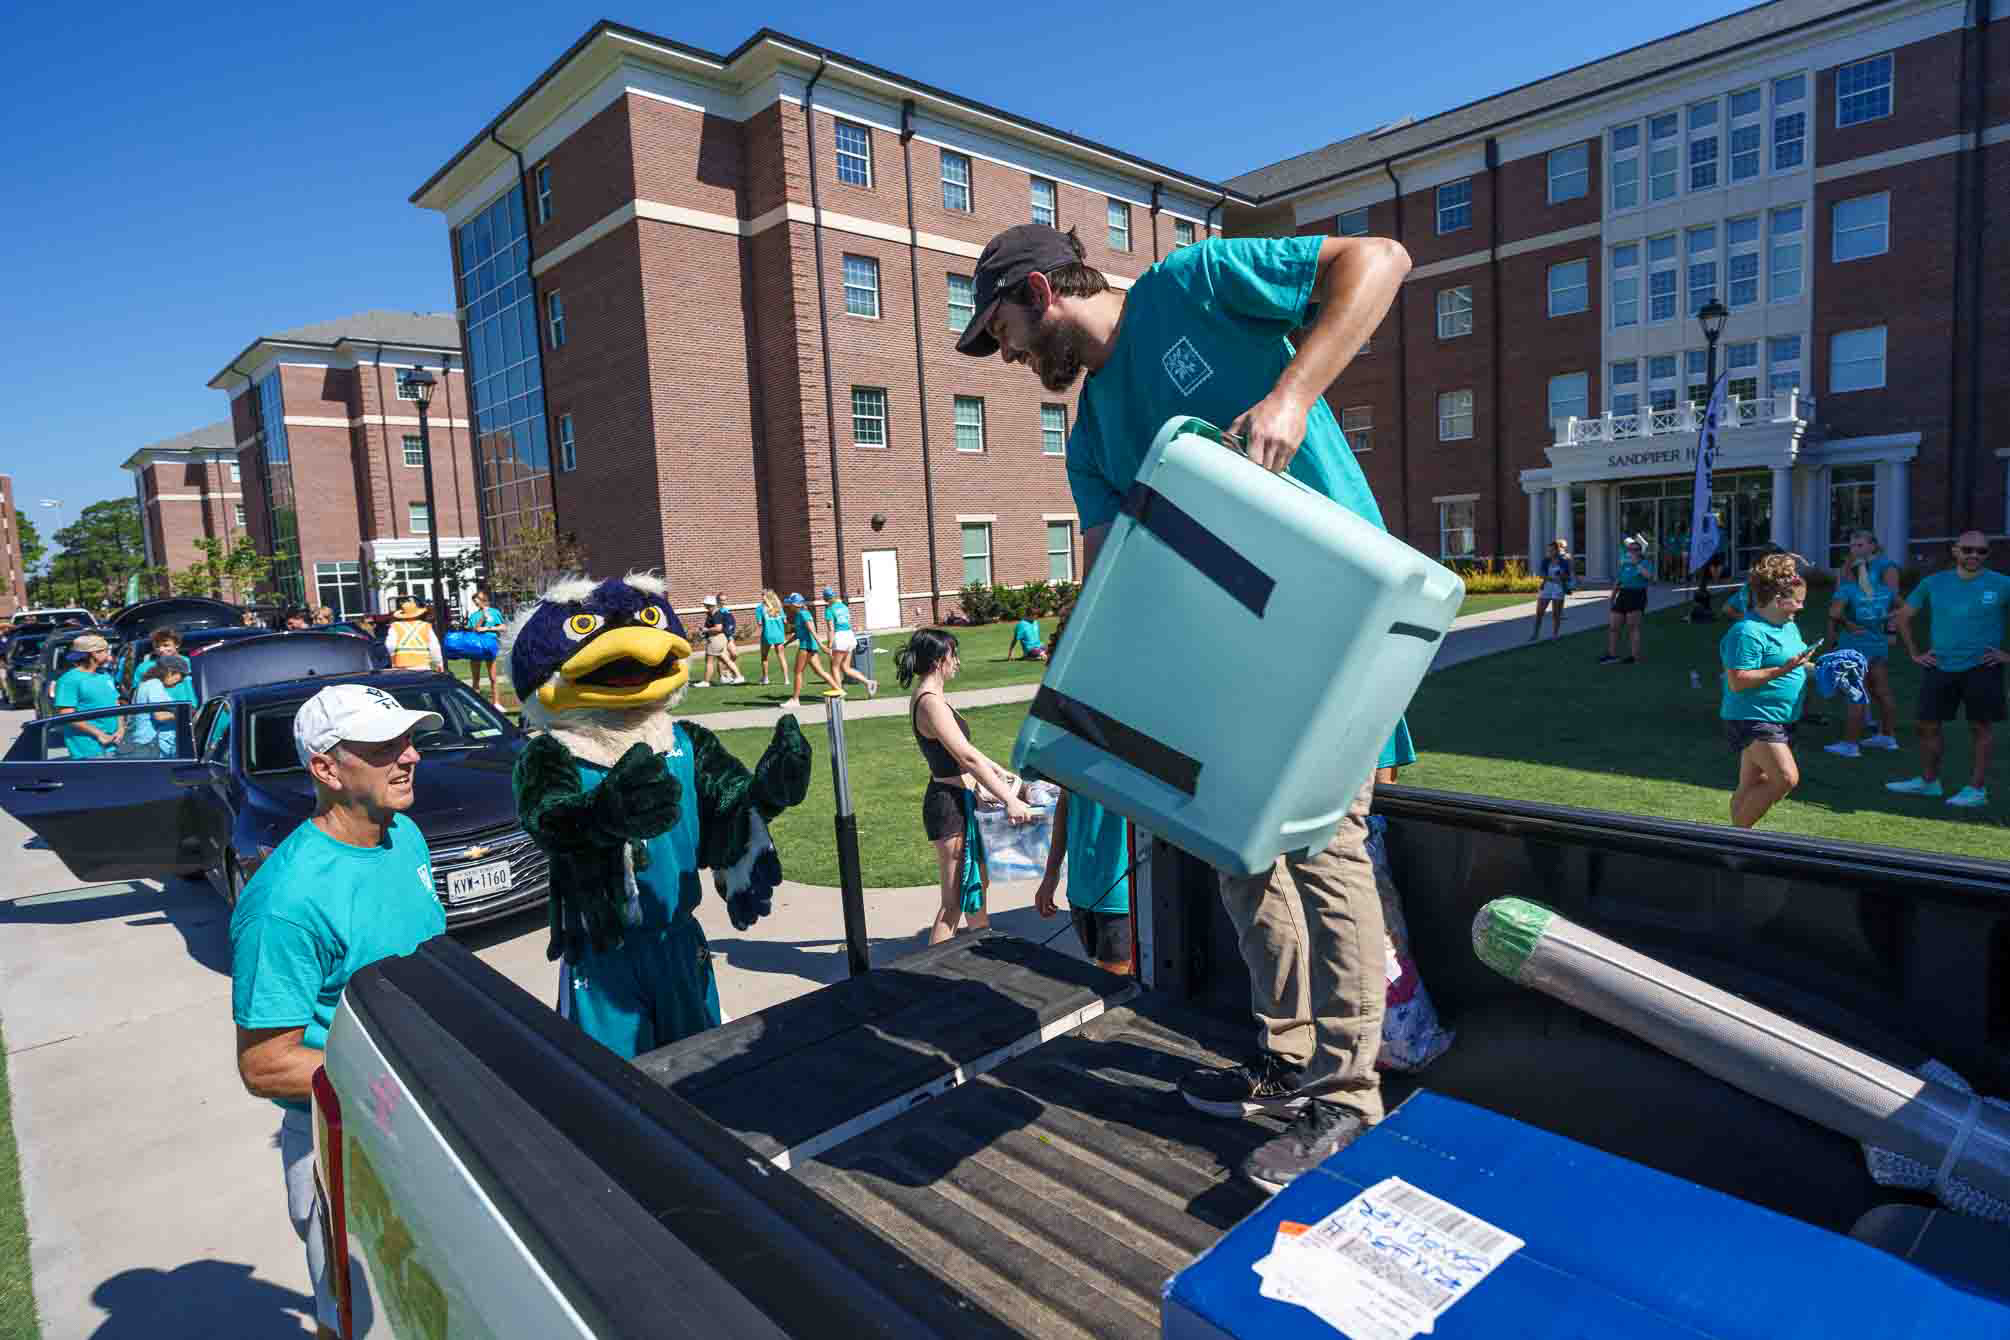  UNCW's 2023-24 academic year will begin with the traditional freshmen move-in days, followed by a series of signature back-to-school events known as UNCWelcome.  